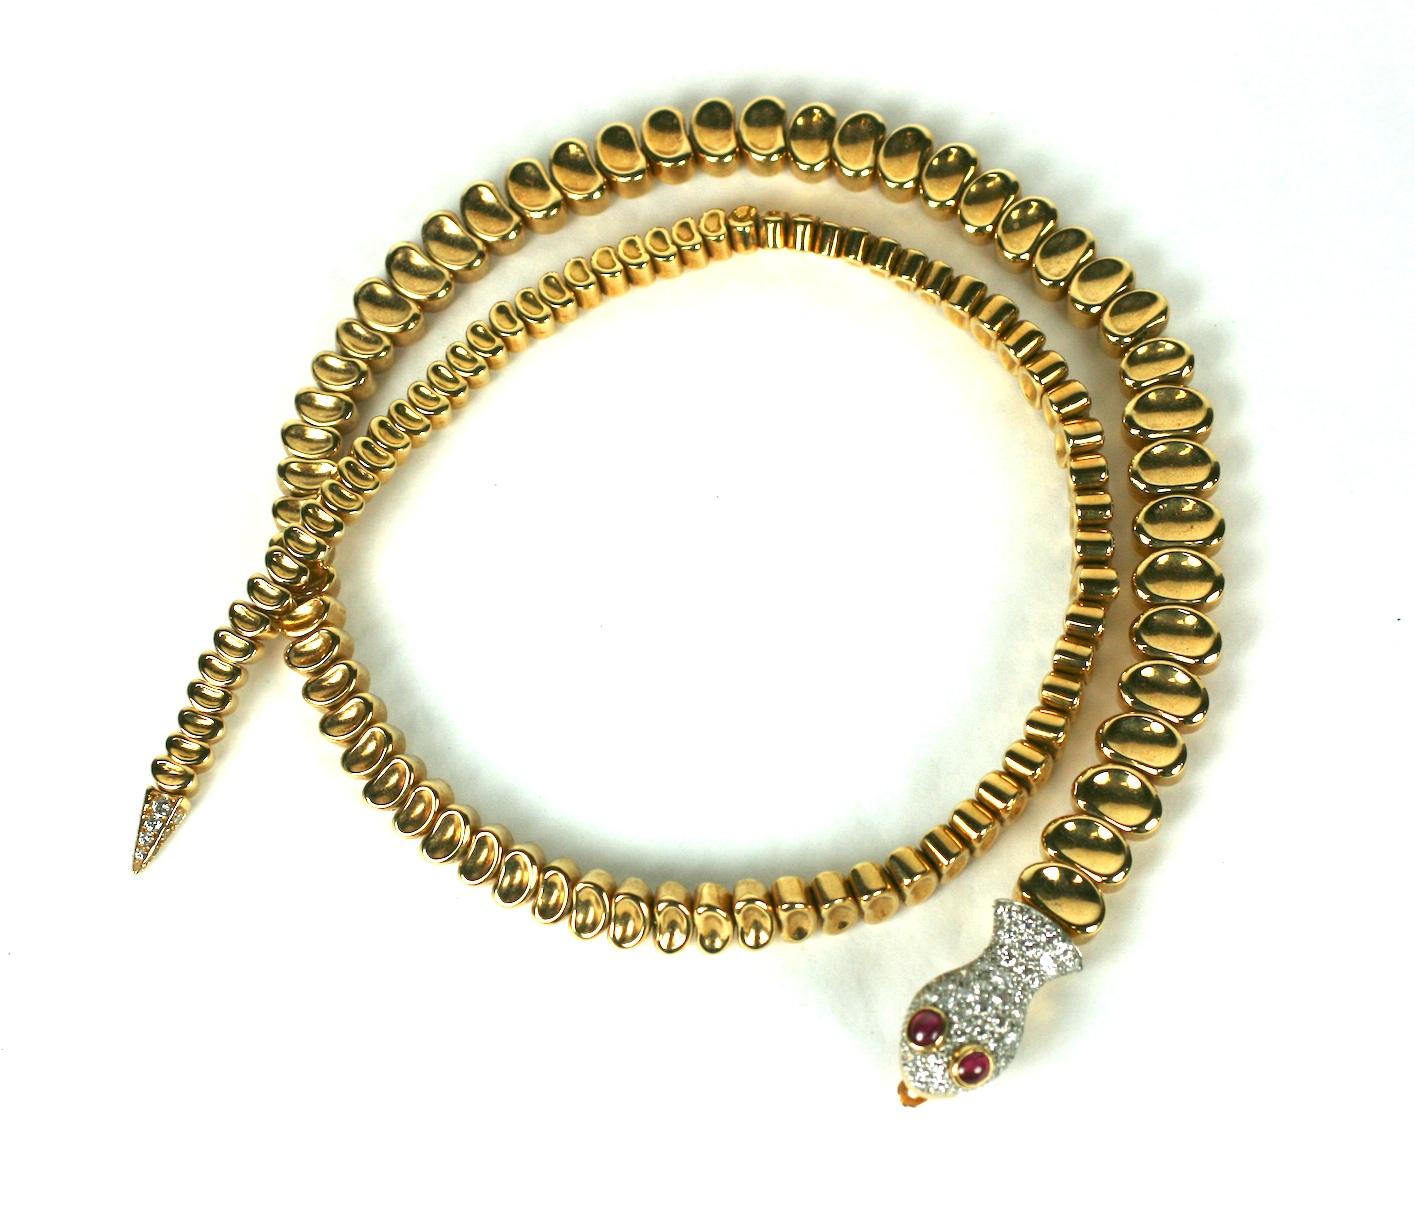 This elegant Gold and Diamond Snake Necklace was a custom designed and ordered piece from the 1970's. The body construction is very similar to the Elsa Peretti's articulated snake belts/necklaces for Tiffany, but, the owner has added a diamond and